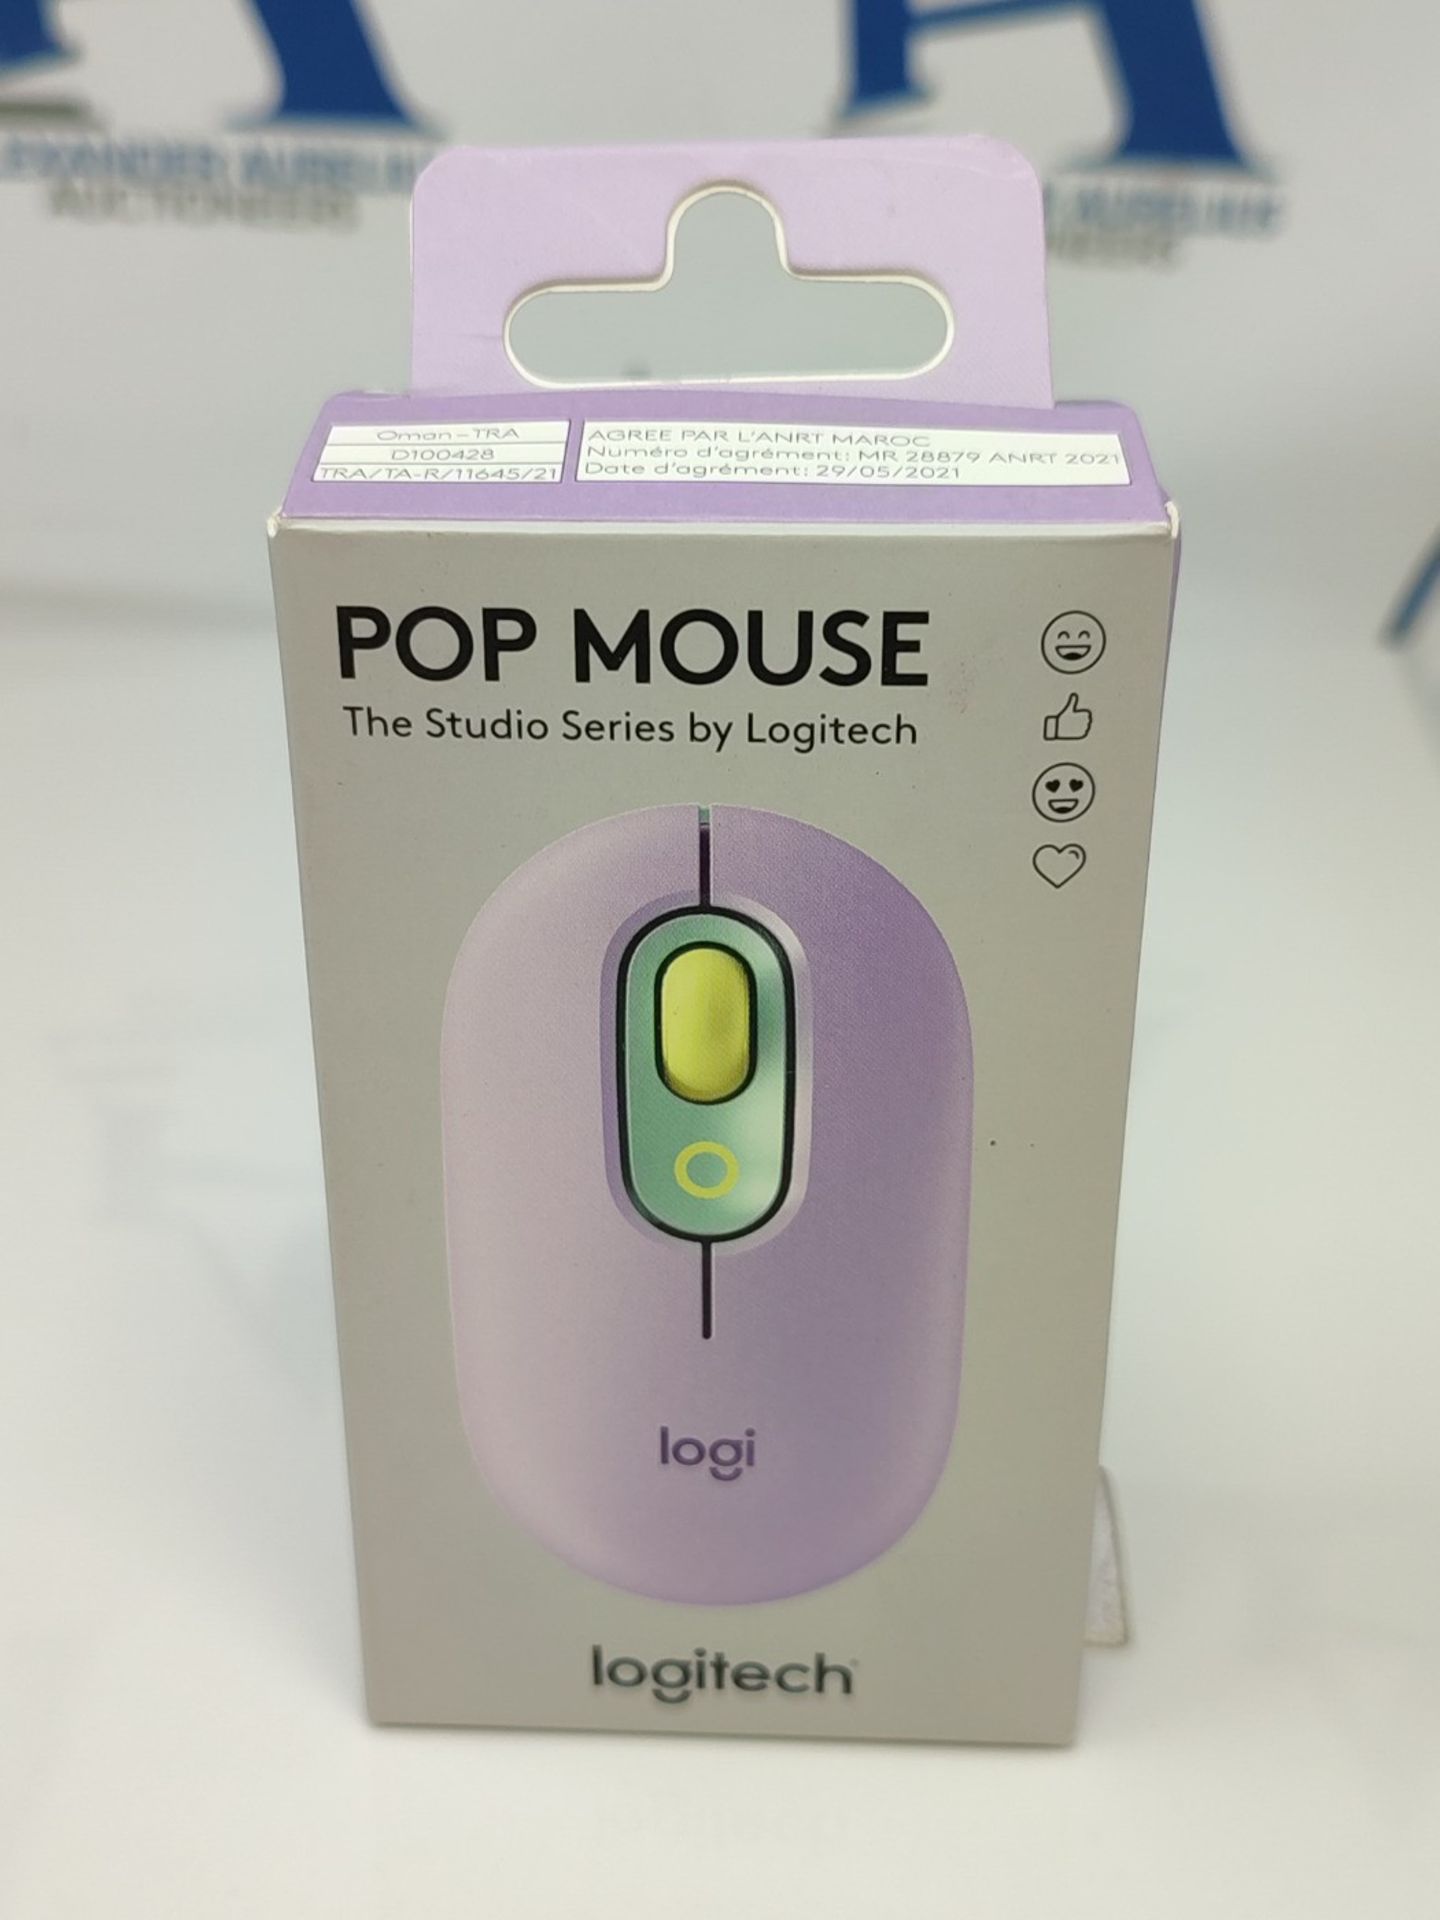 Logitech POP Mouse, Wireless Mouse with customizable emojis, SilentTouch Technology, p - Image 2 of 3